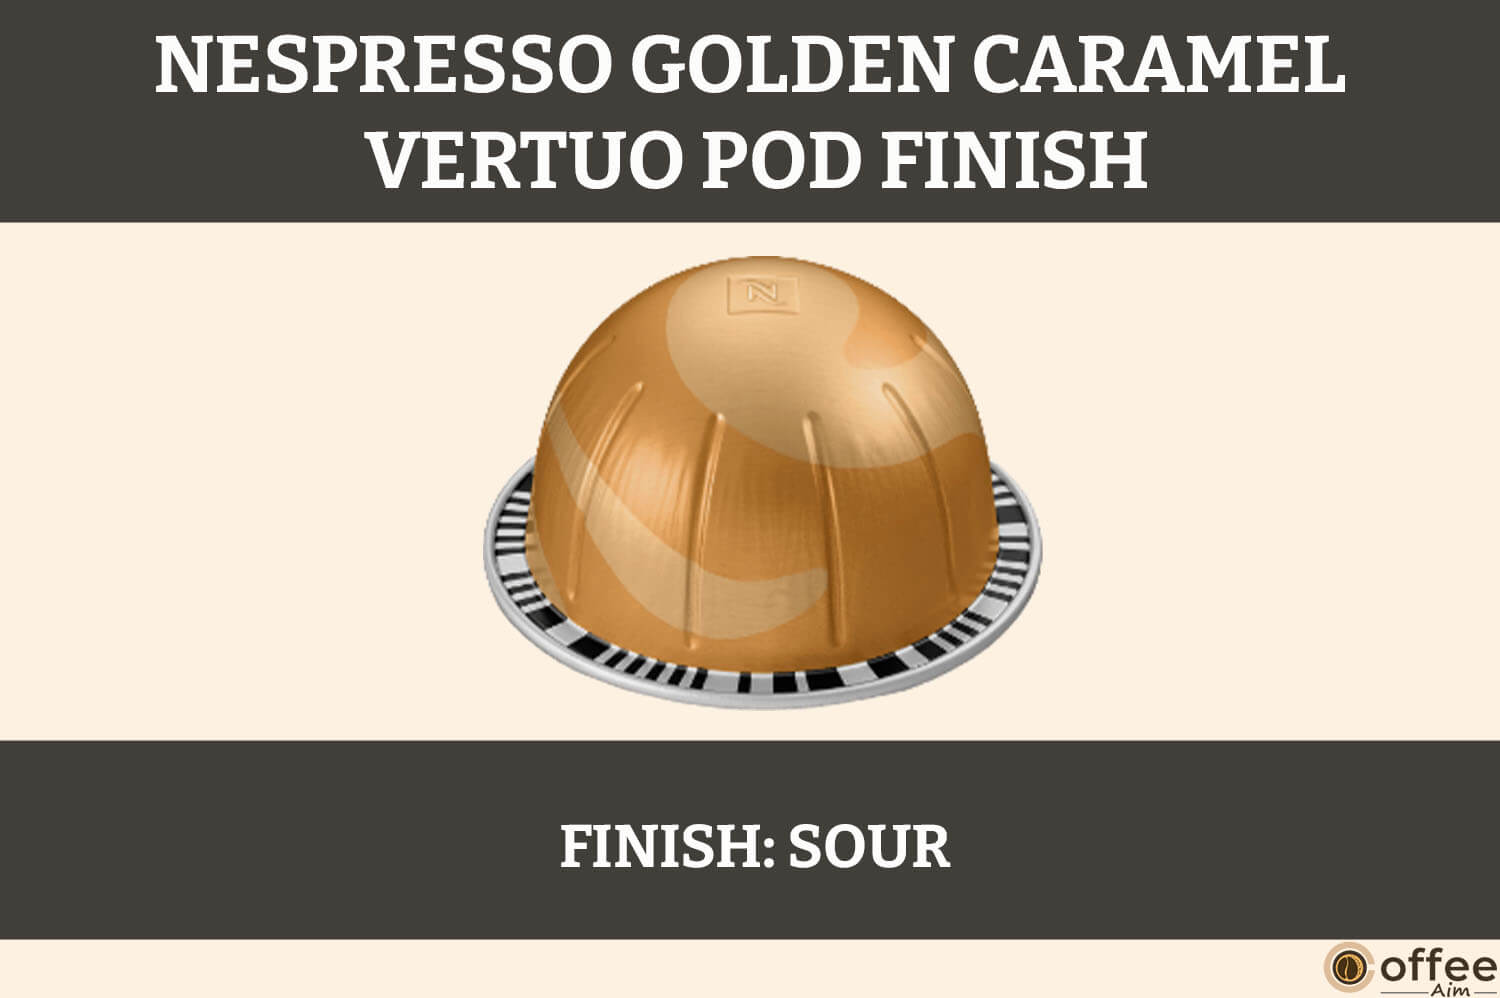 This image represents the Finish of Nespresso Golden Caramel Vertuo Pod for the article 'Nespresso Golden Caramel Vertuo Pod Review'